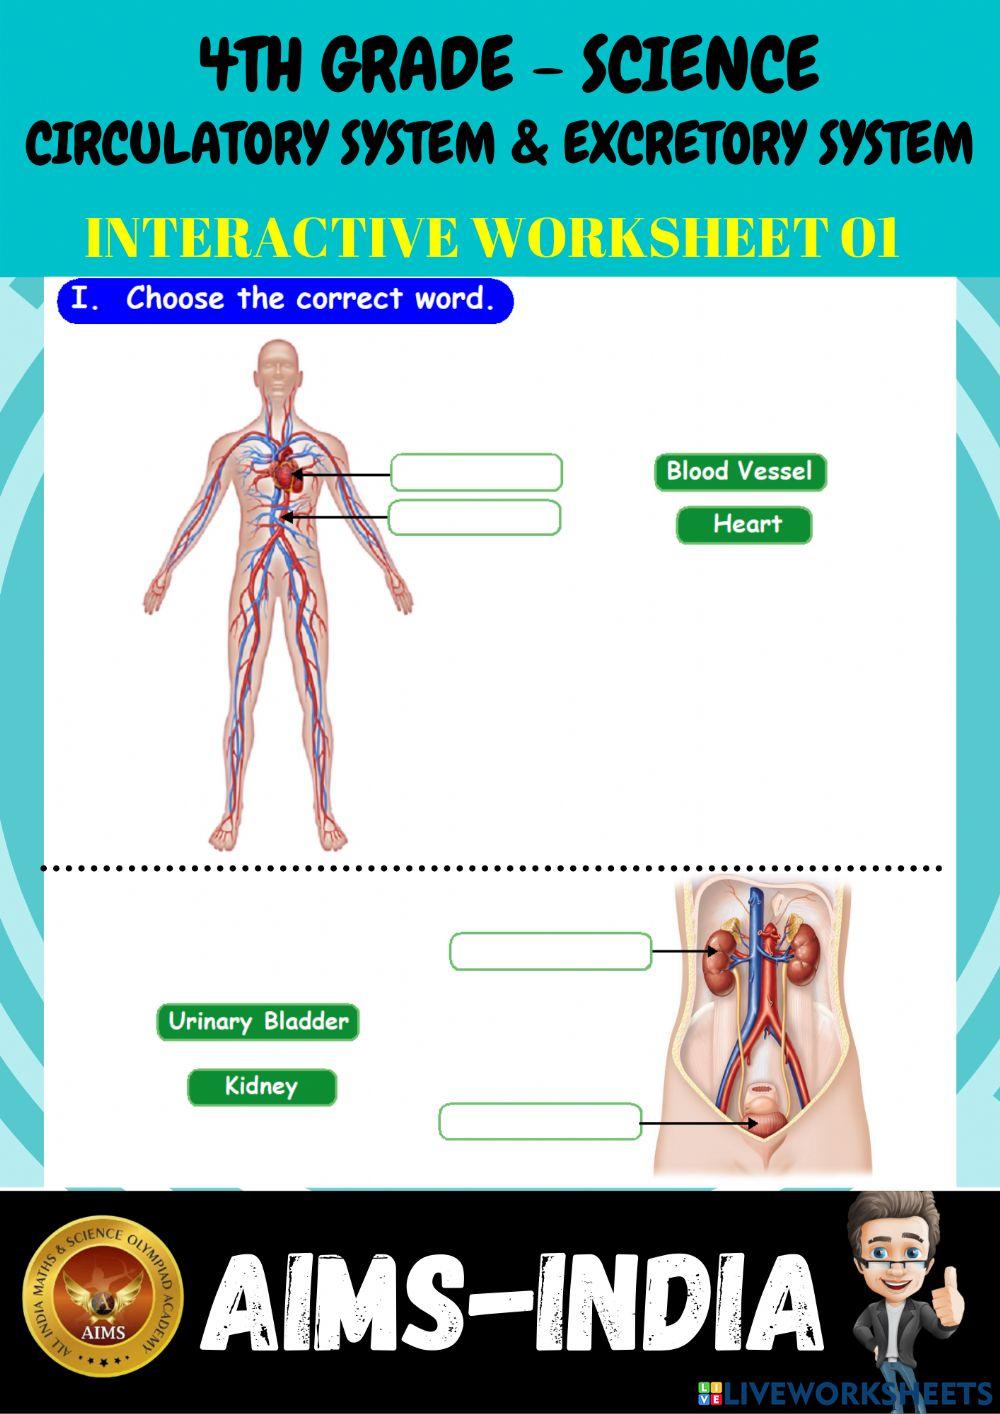 4th-science-ps01-circulatory system & excretory system